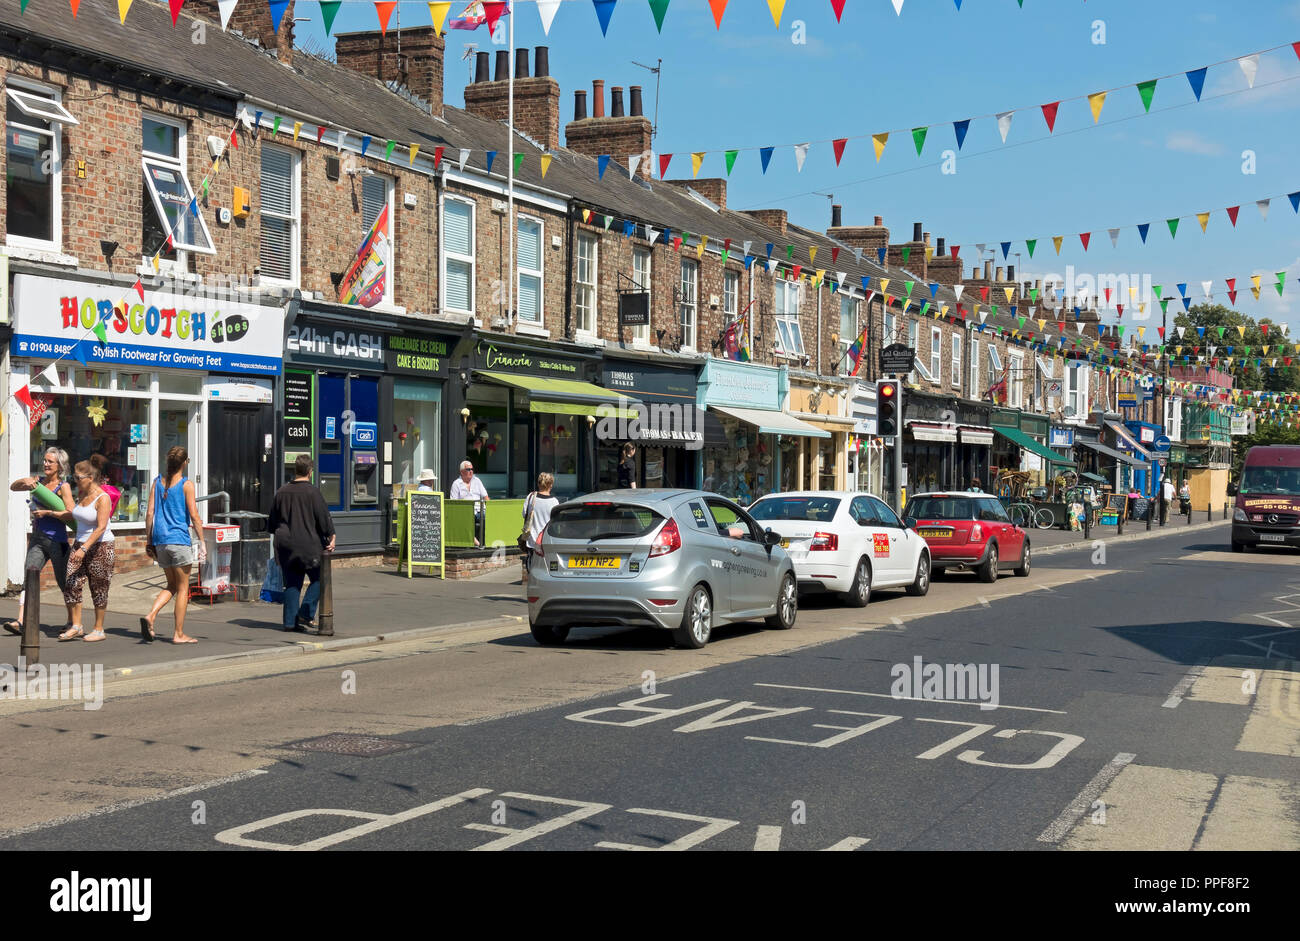 Shops stores businesses on Bishopthorpe Road in summer (also known as Bishy Road) York North Yorkshire England UK United Kingdom GB Great Britain Stock Photo